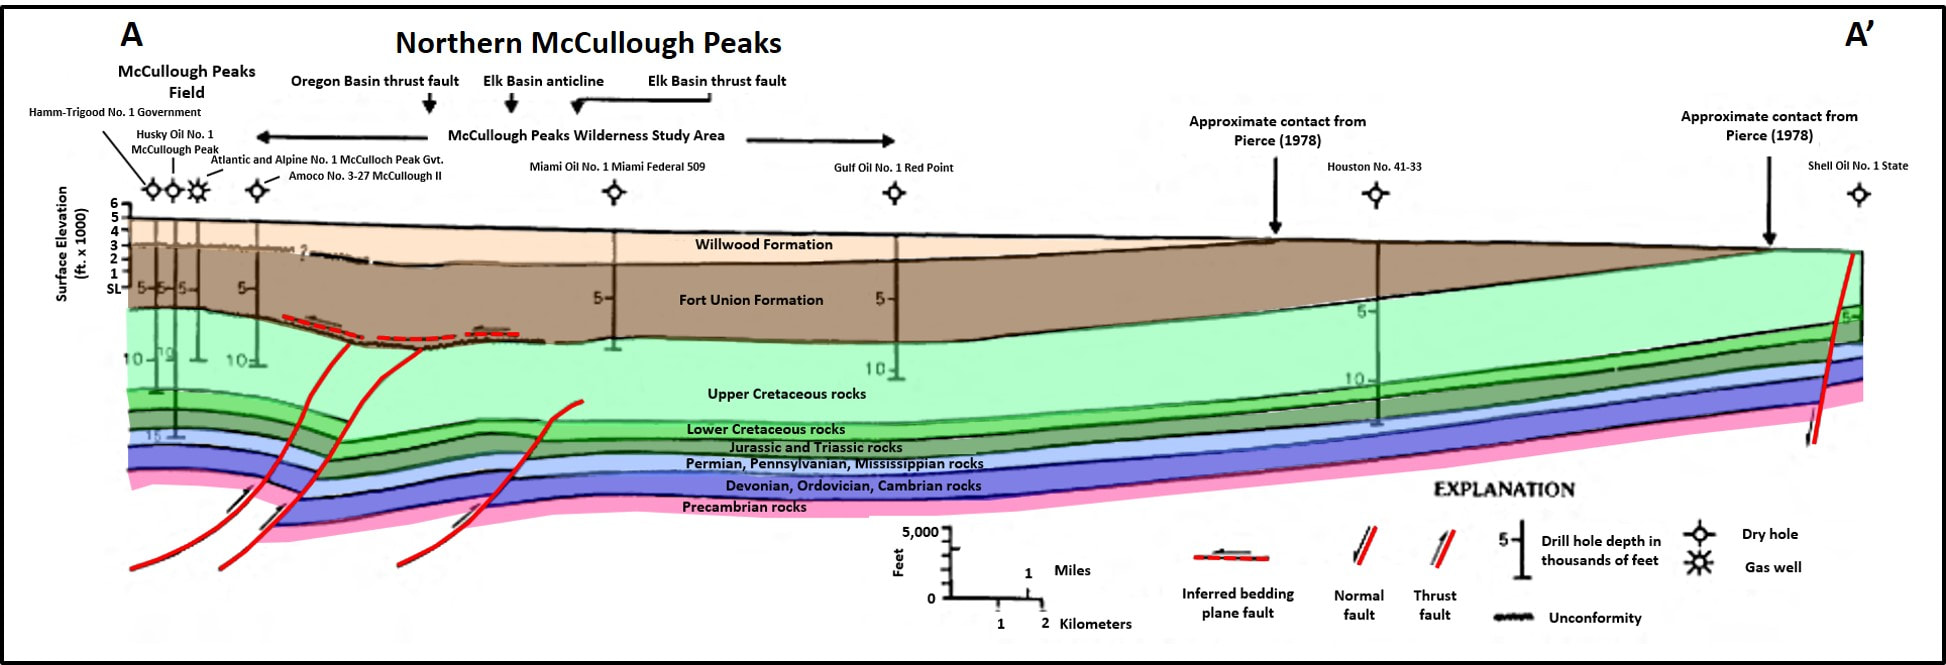 McCullough Peaks structural geology cross section, Bighorn Basin, Wyoming